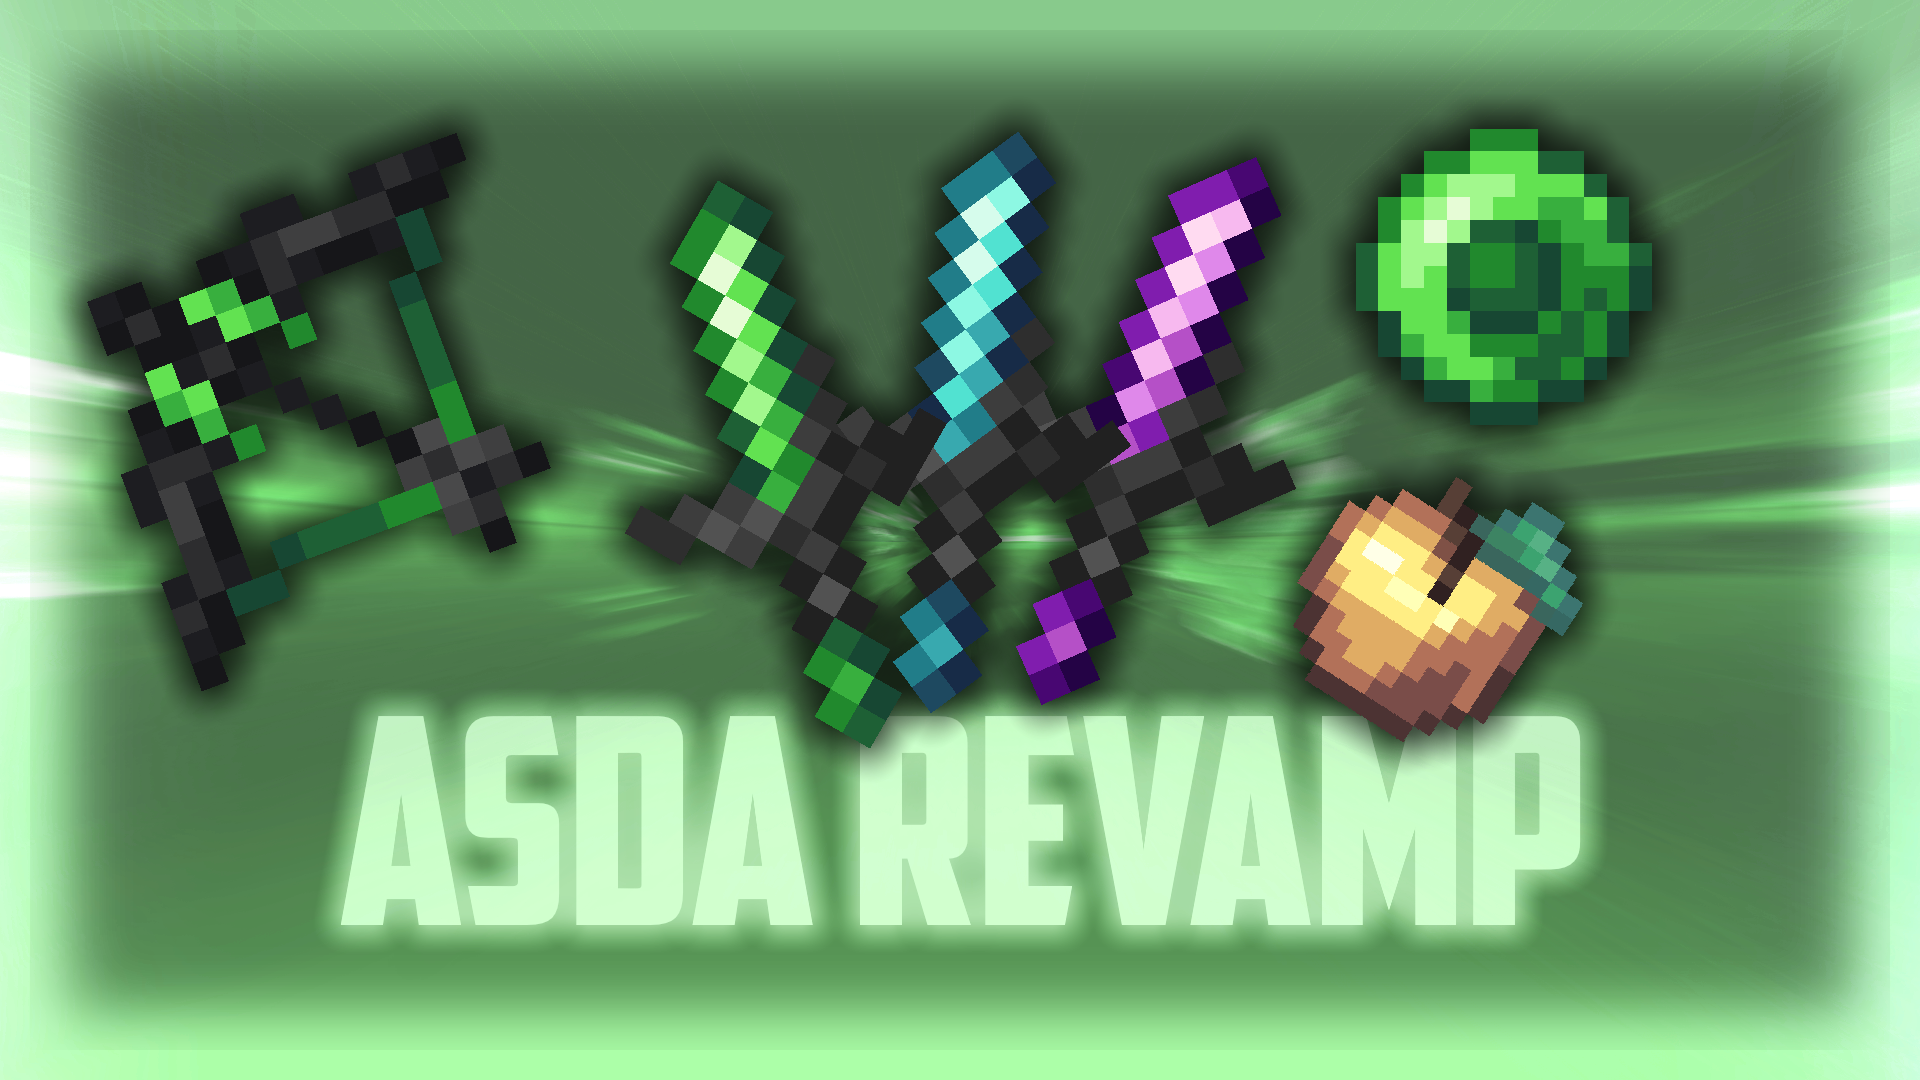 Asda Revamp - Blue recolor 16 by Zlax on PvPRP